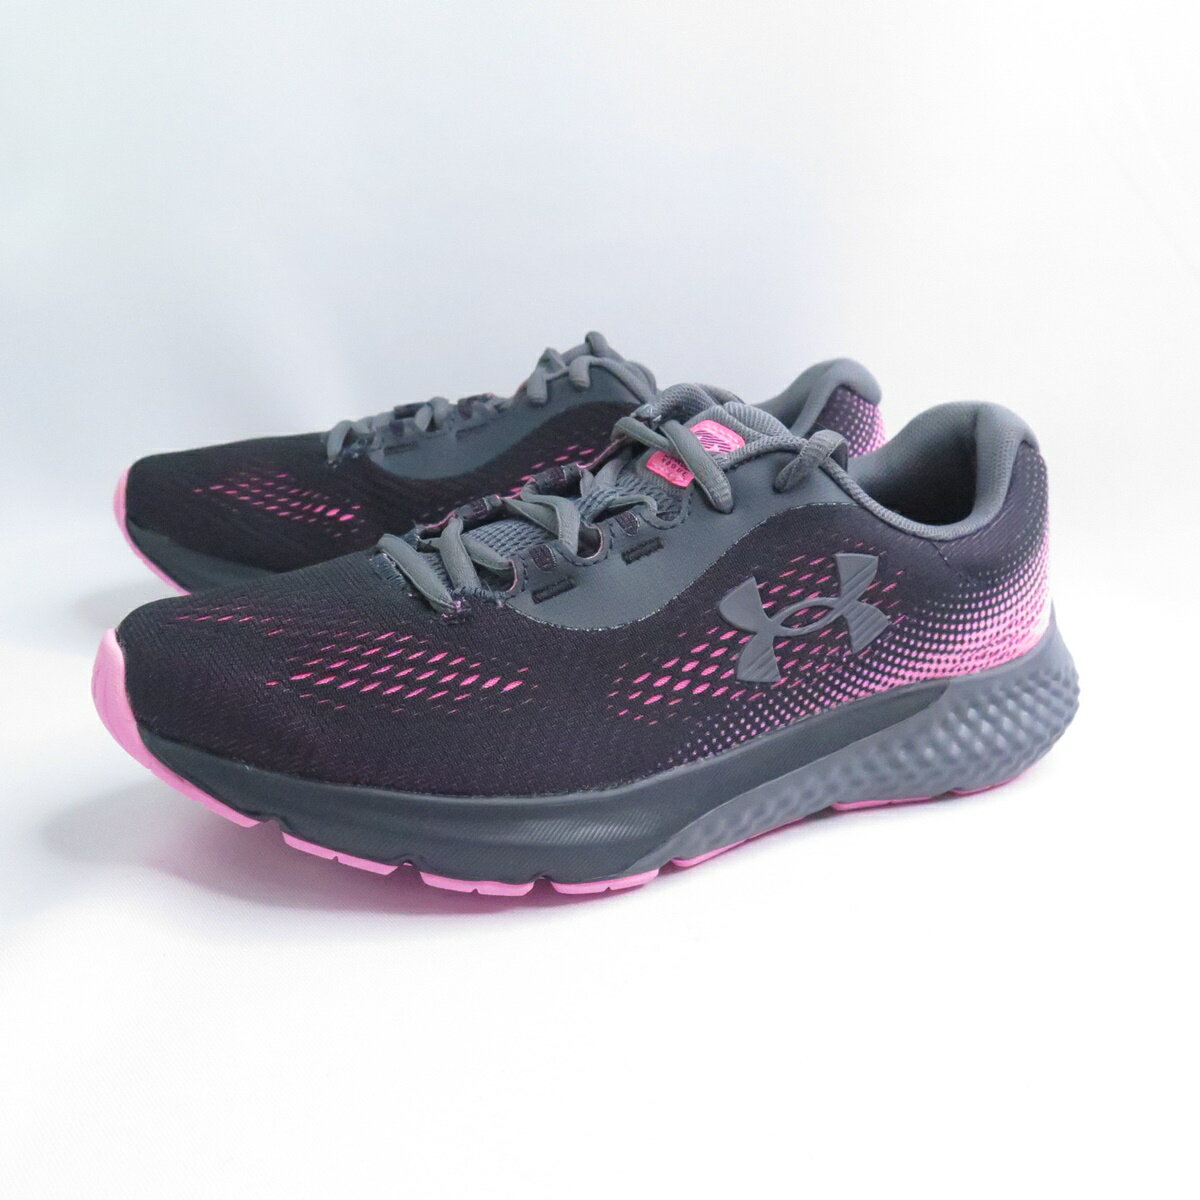 Under Armour 3027005101 Charged Rogue 4 女 慢跑鞋 灰粉【iSport愛運動】